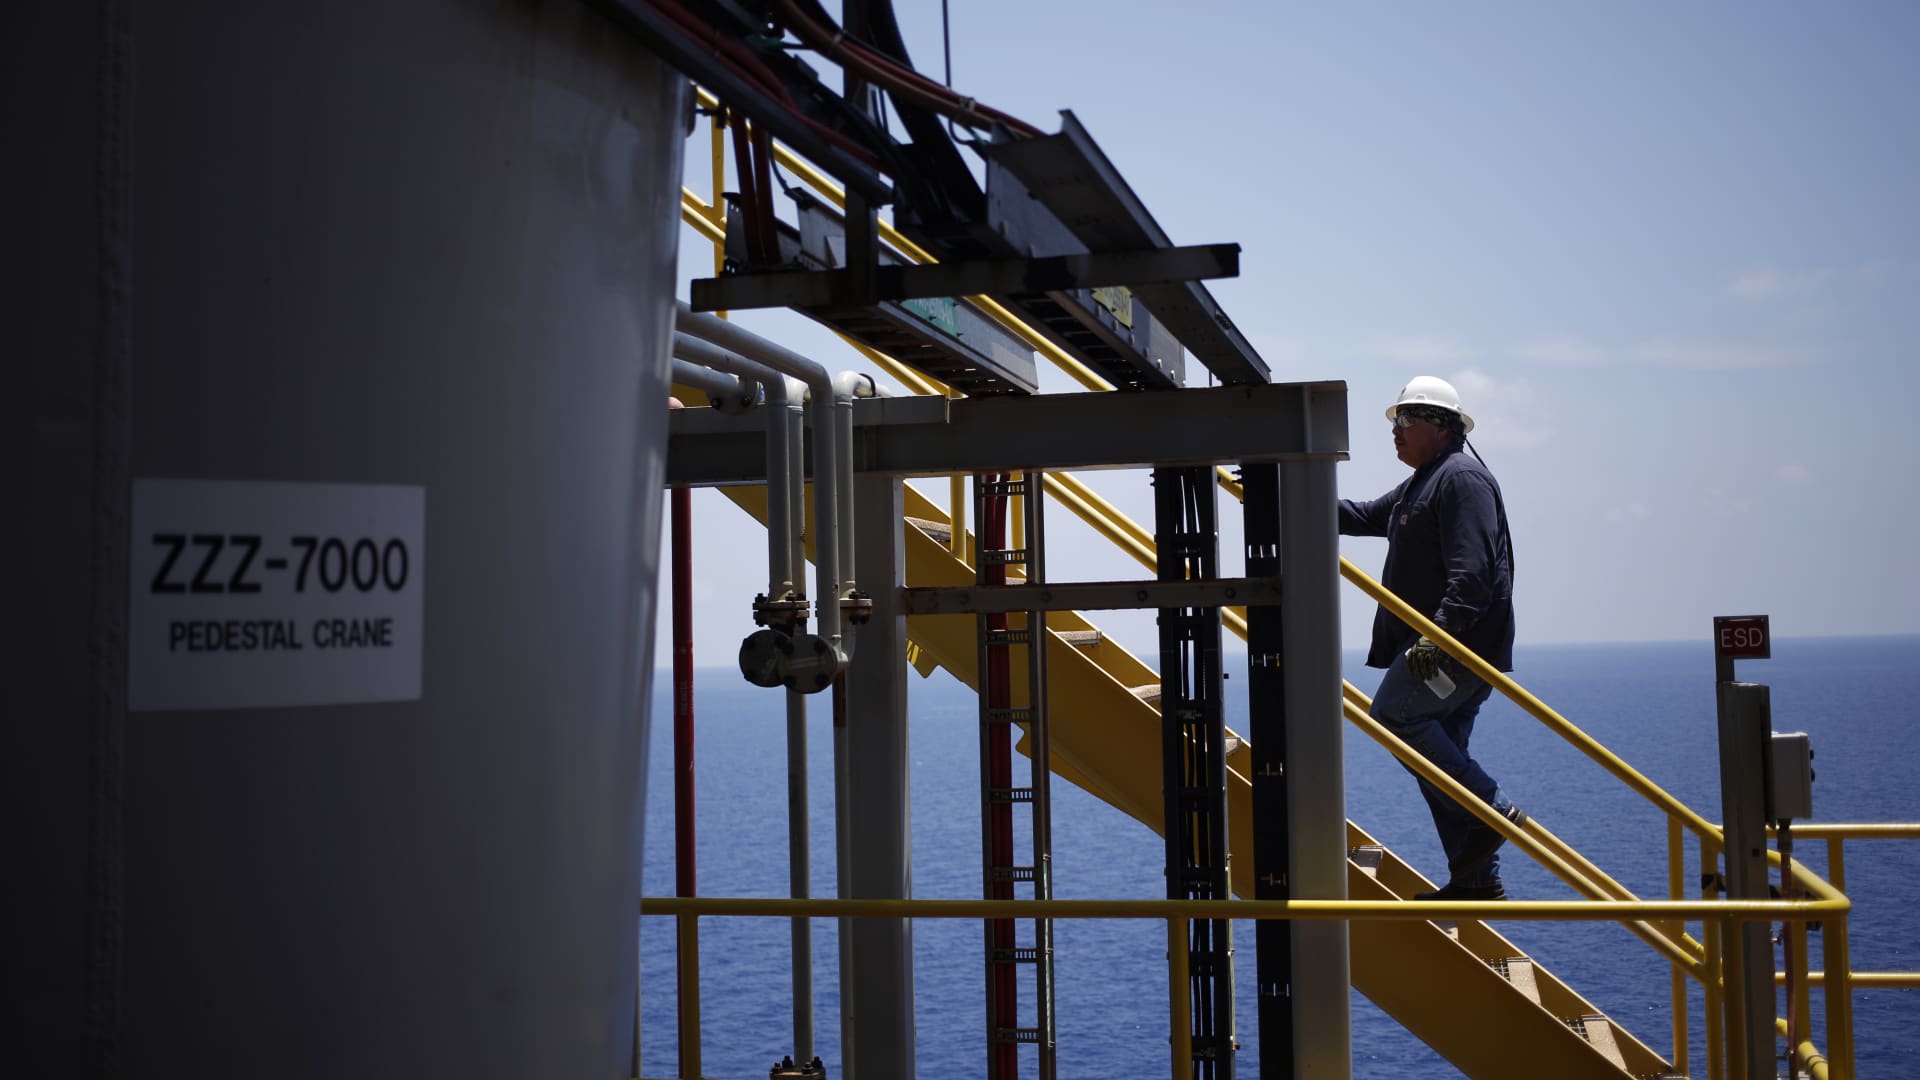 In July 2021, some of the world's largest oil and gas majors were ordered to pay hundreds of millions of dollars as part of a $7.2 billion environmental liabilities bill to retire aging oil and gas wells in the Gulf of Mexico that they used to own.